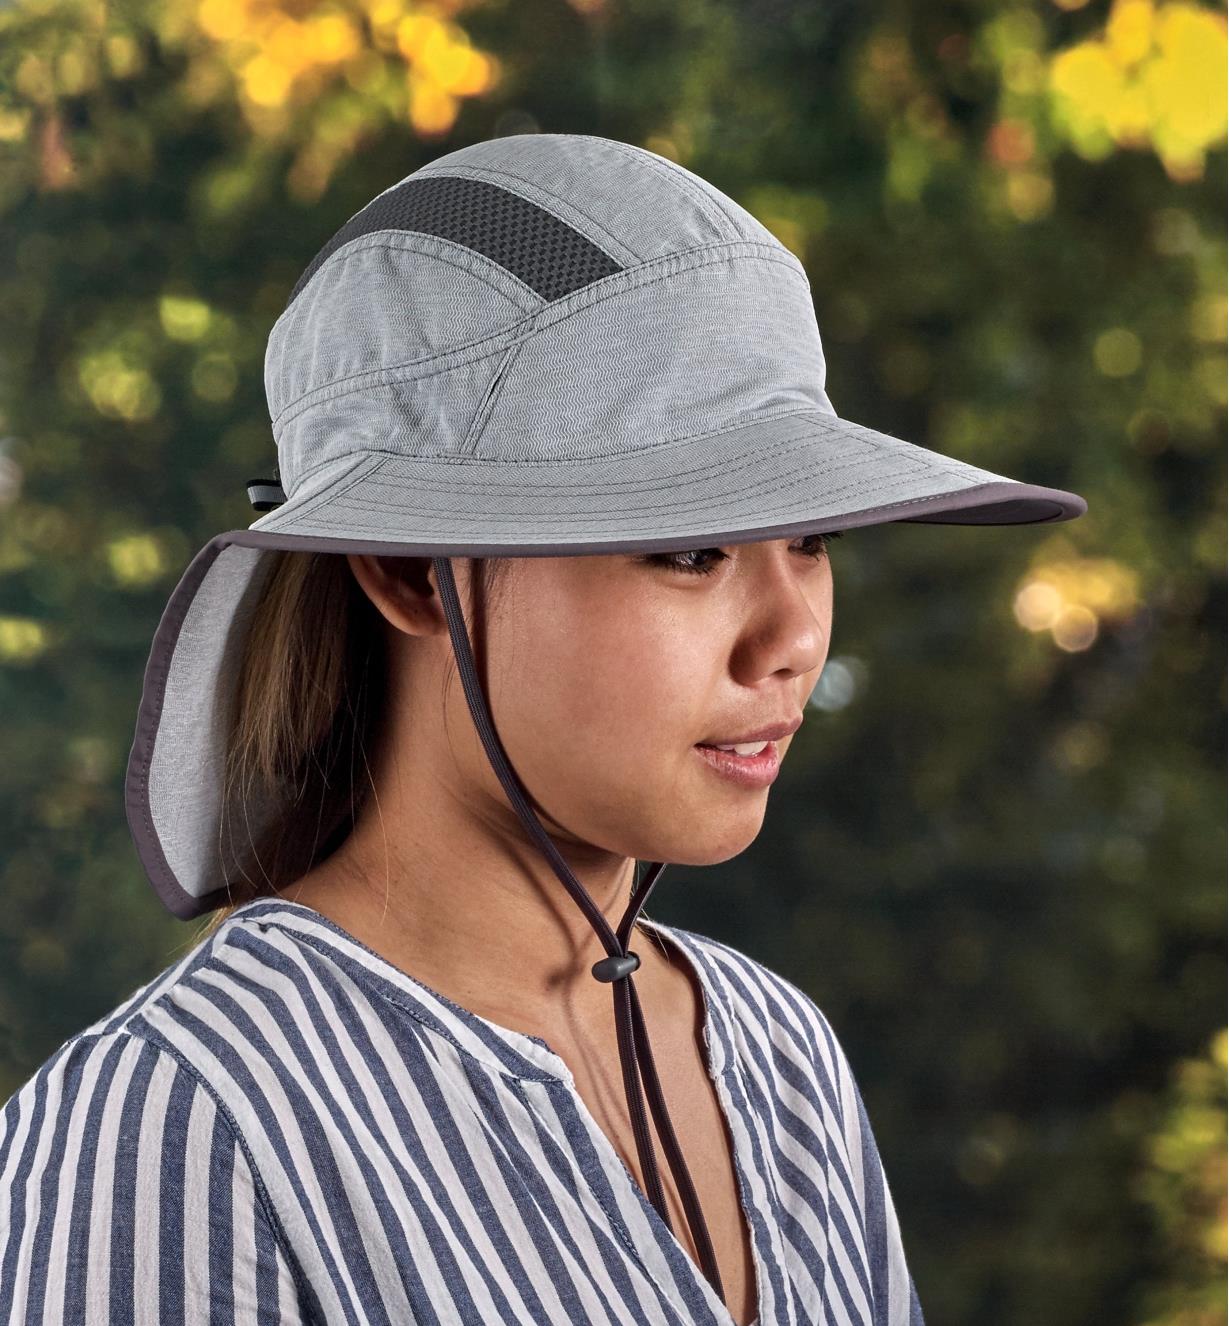 Side view of a woman wearing a light gray adventure sun hat